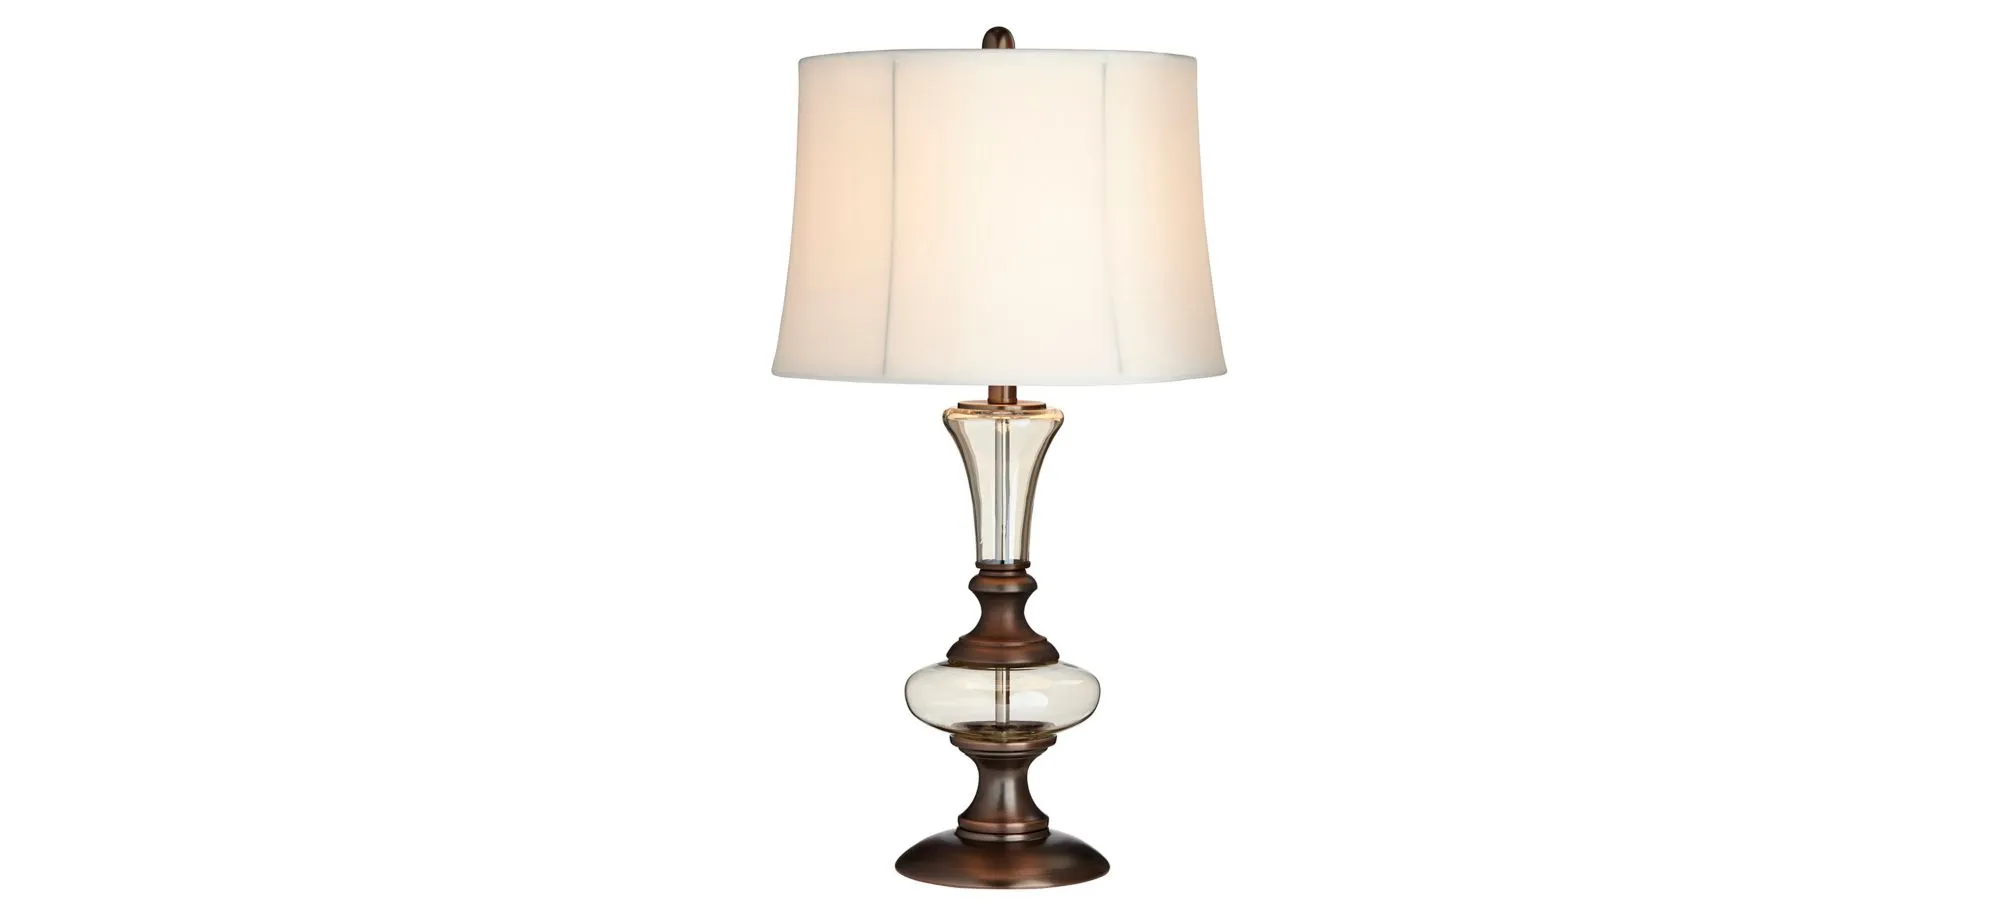 Chiswell Table Lamp in Champagne/Dark Antique Copper by Pacific Coast Lighting